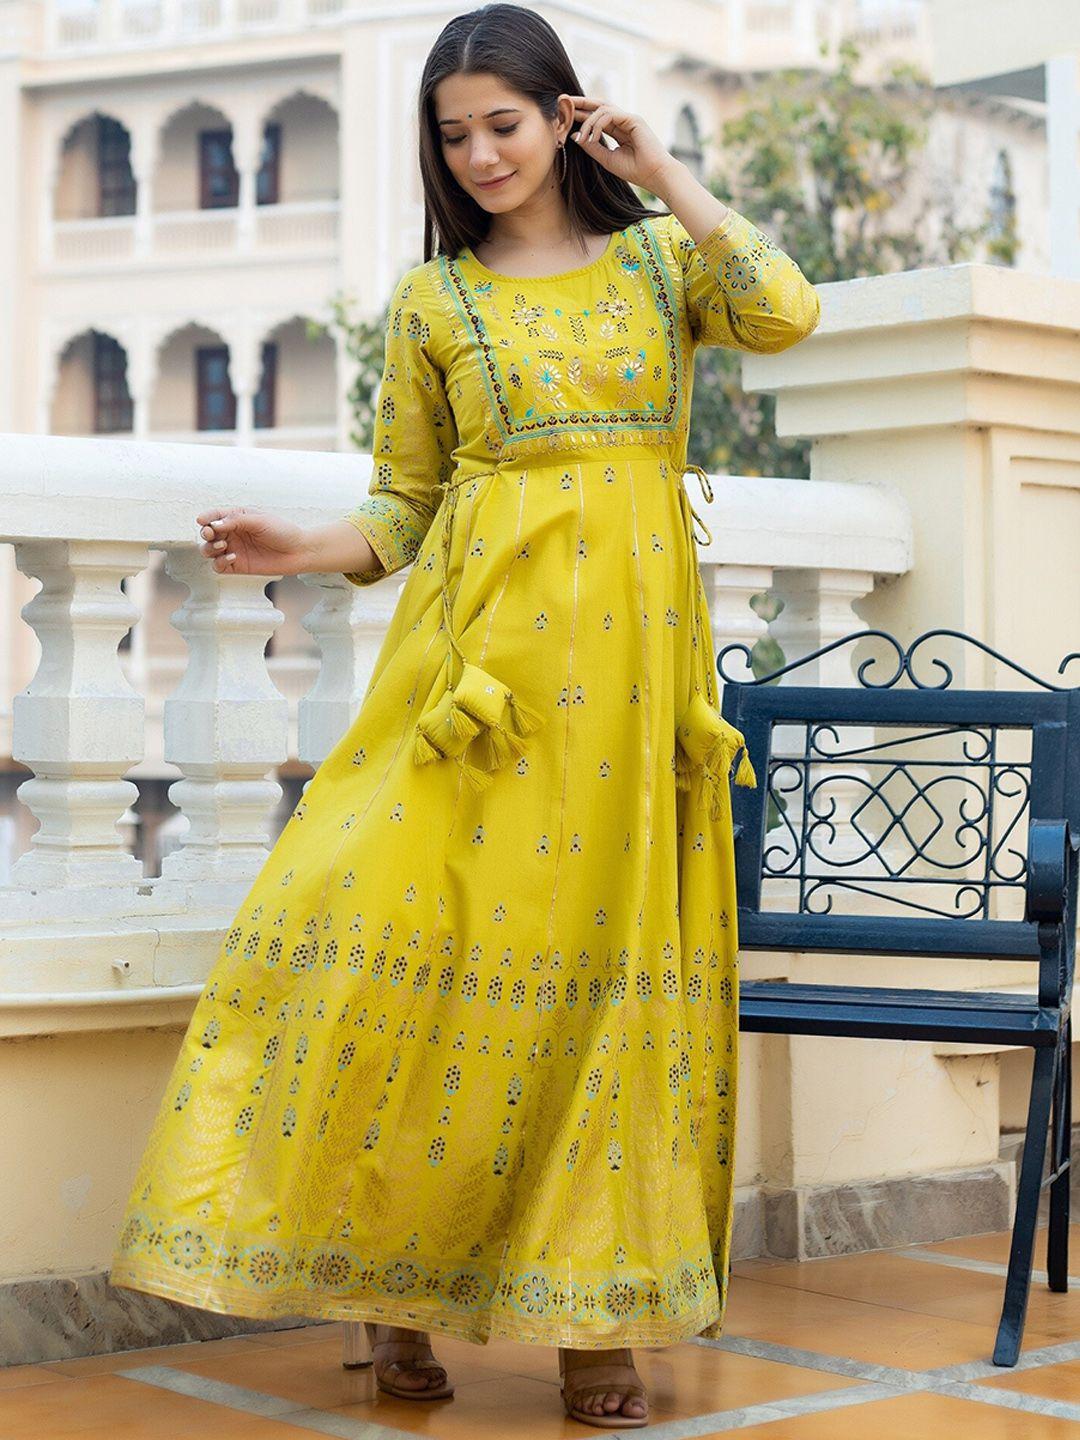 kaajh women yellow embroidered pure cotton a-line maxi ethnic dresses